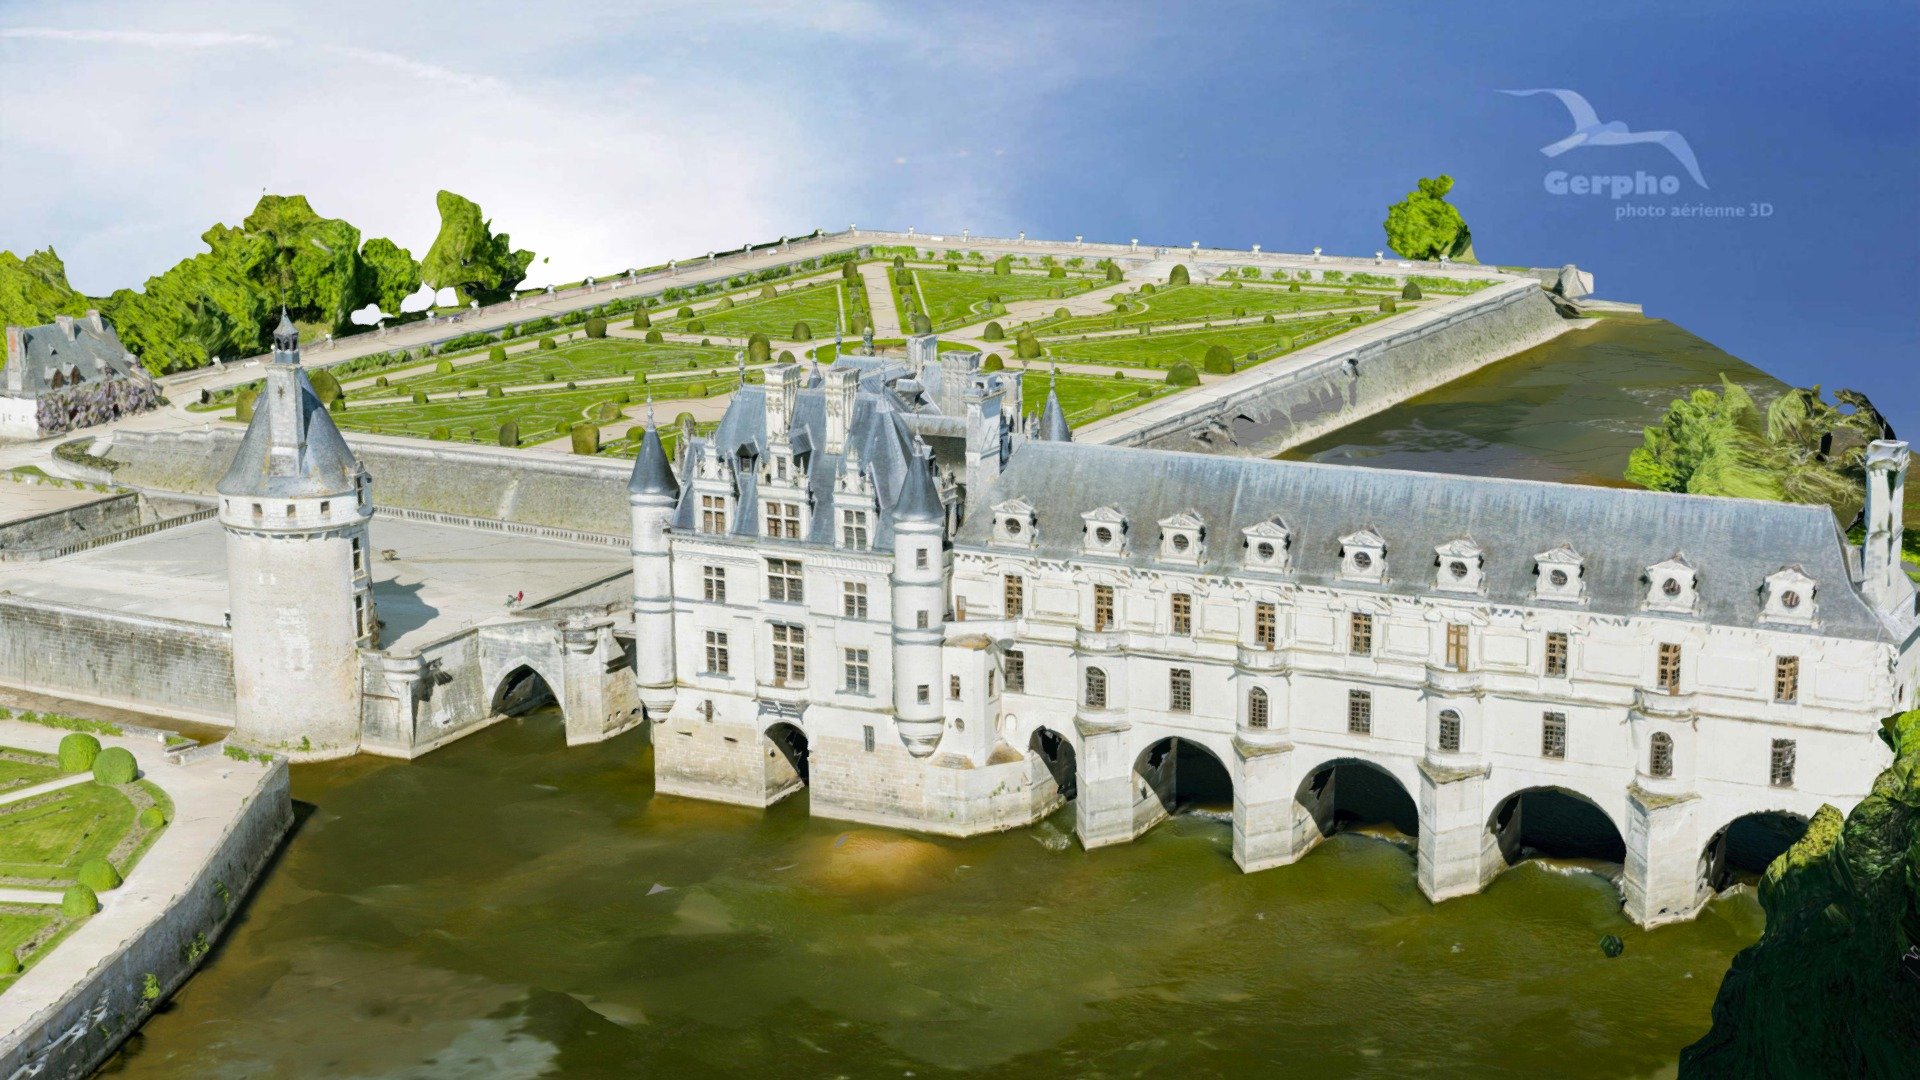 One of the most beautiful and renowned &ldquo;chateaux de la Loire